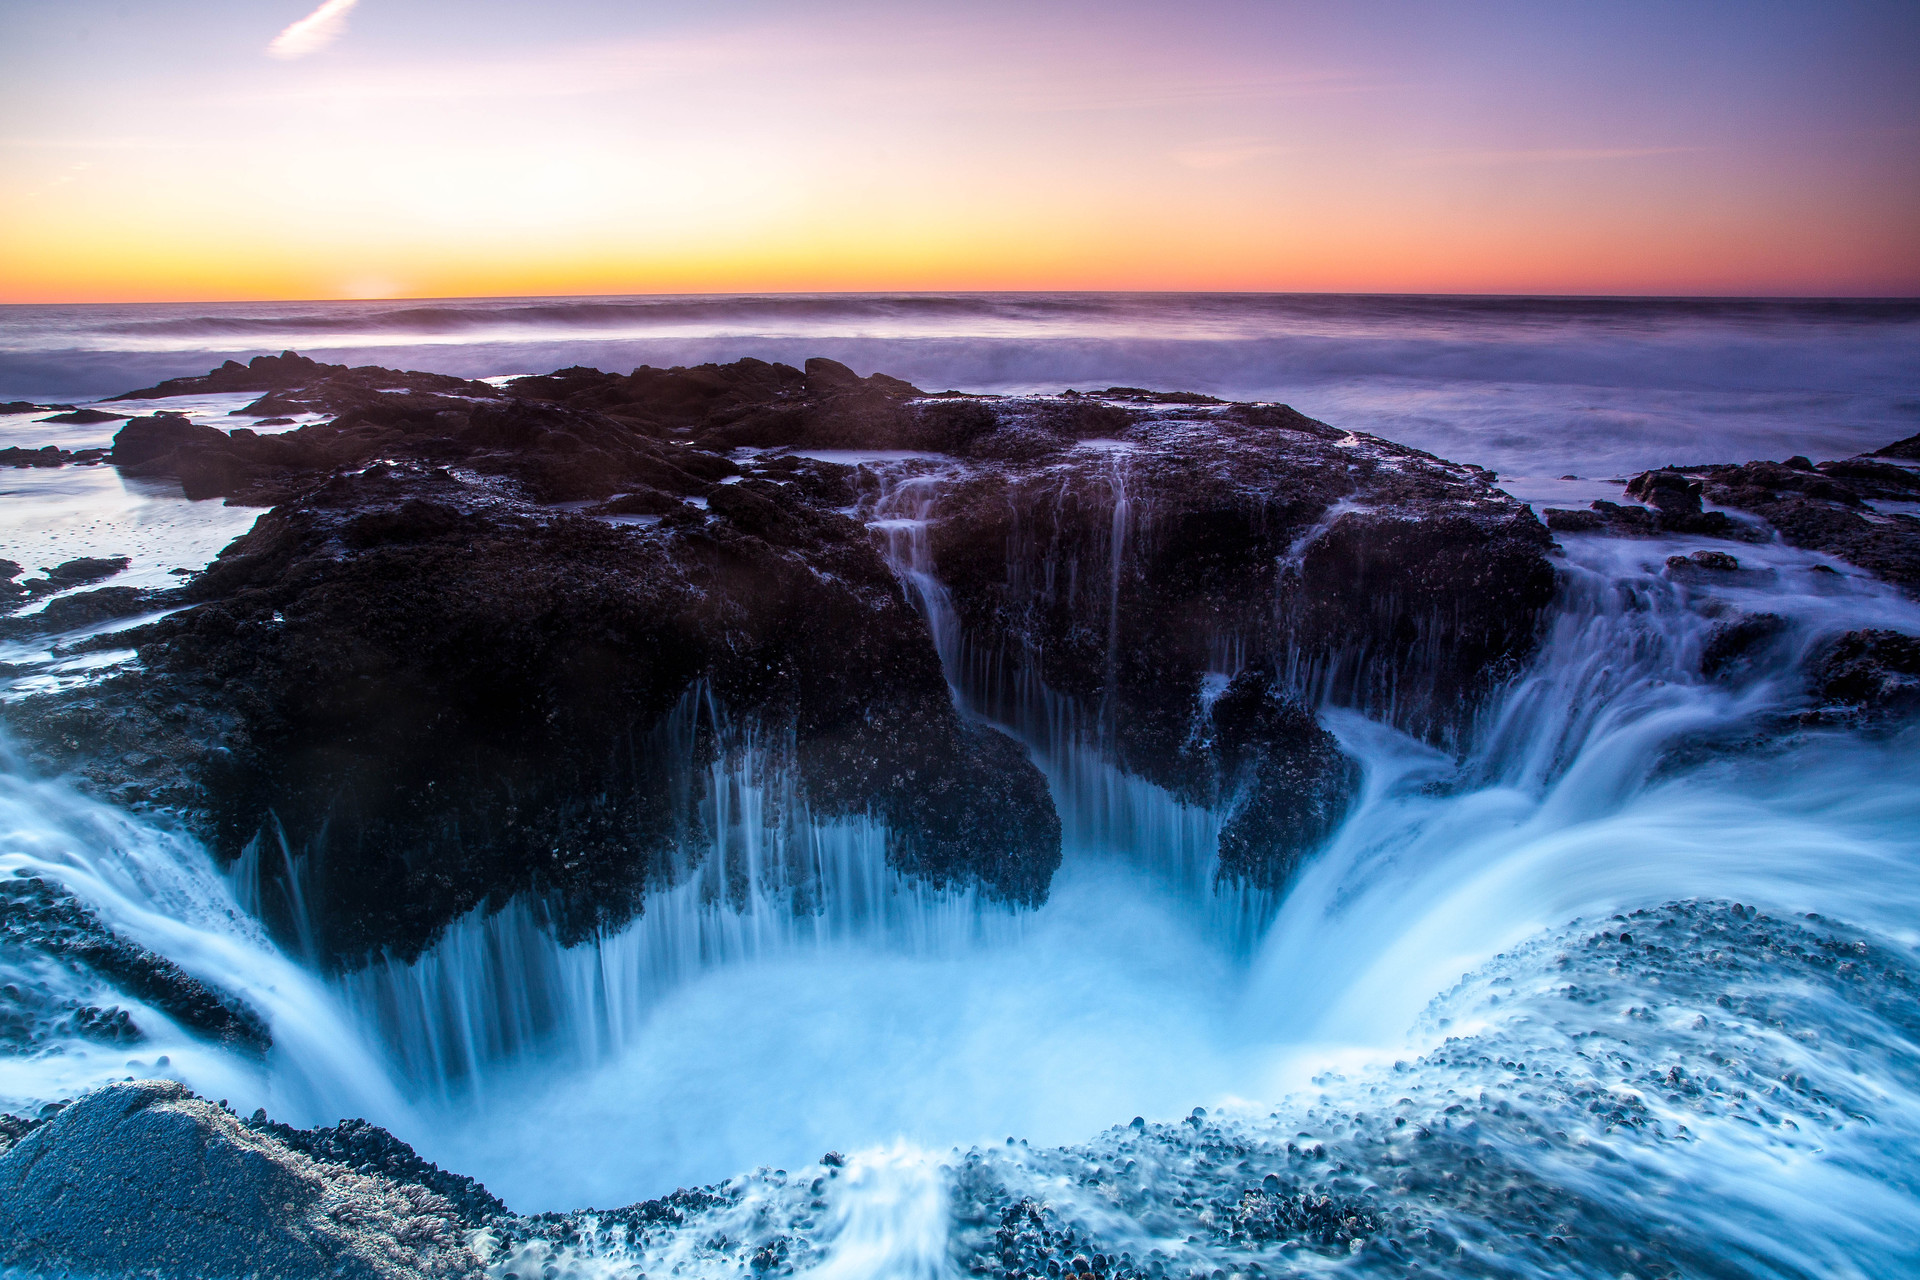 Thor's Well at sunset near Yachats Oregon.